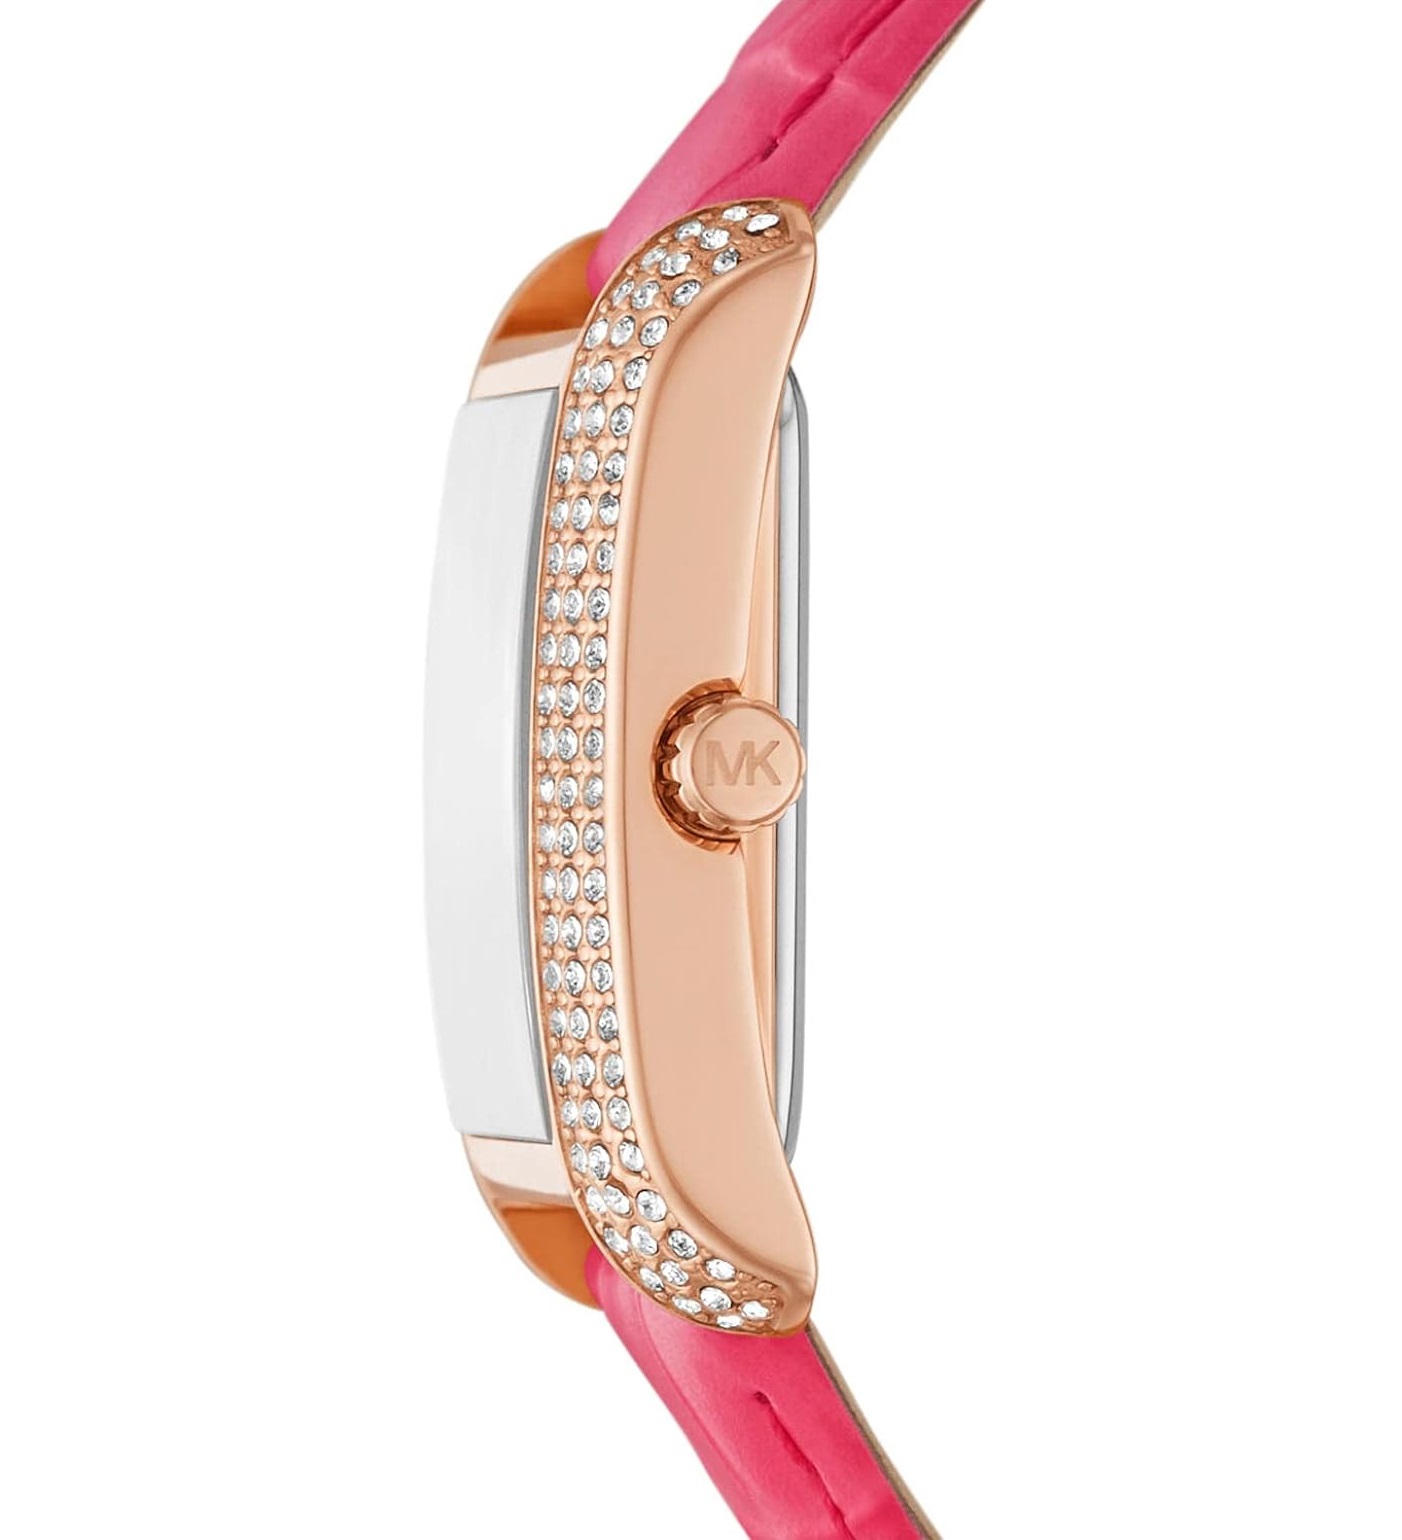 ĐỒNG HỒ MK NỮ MICHAEL KORS EMERY PAVÉ ROSE GOLD-TONE AND CROCODILE EMBOSSED LEATHER WATCH MK2984 4